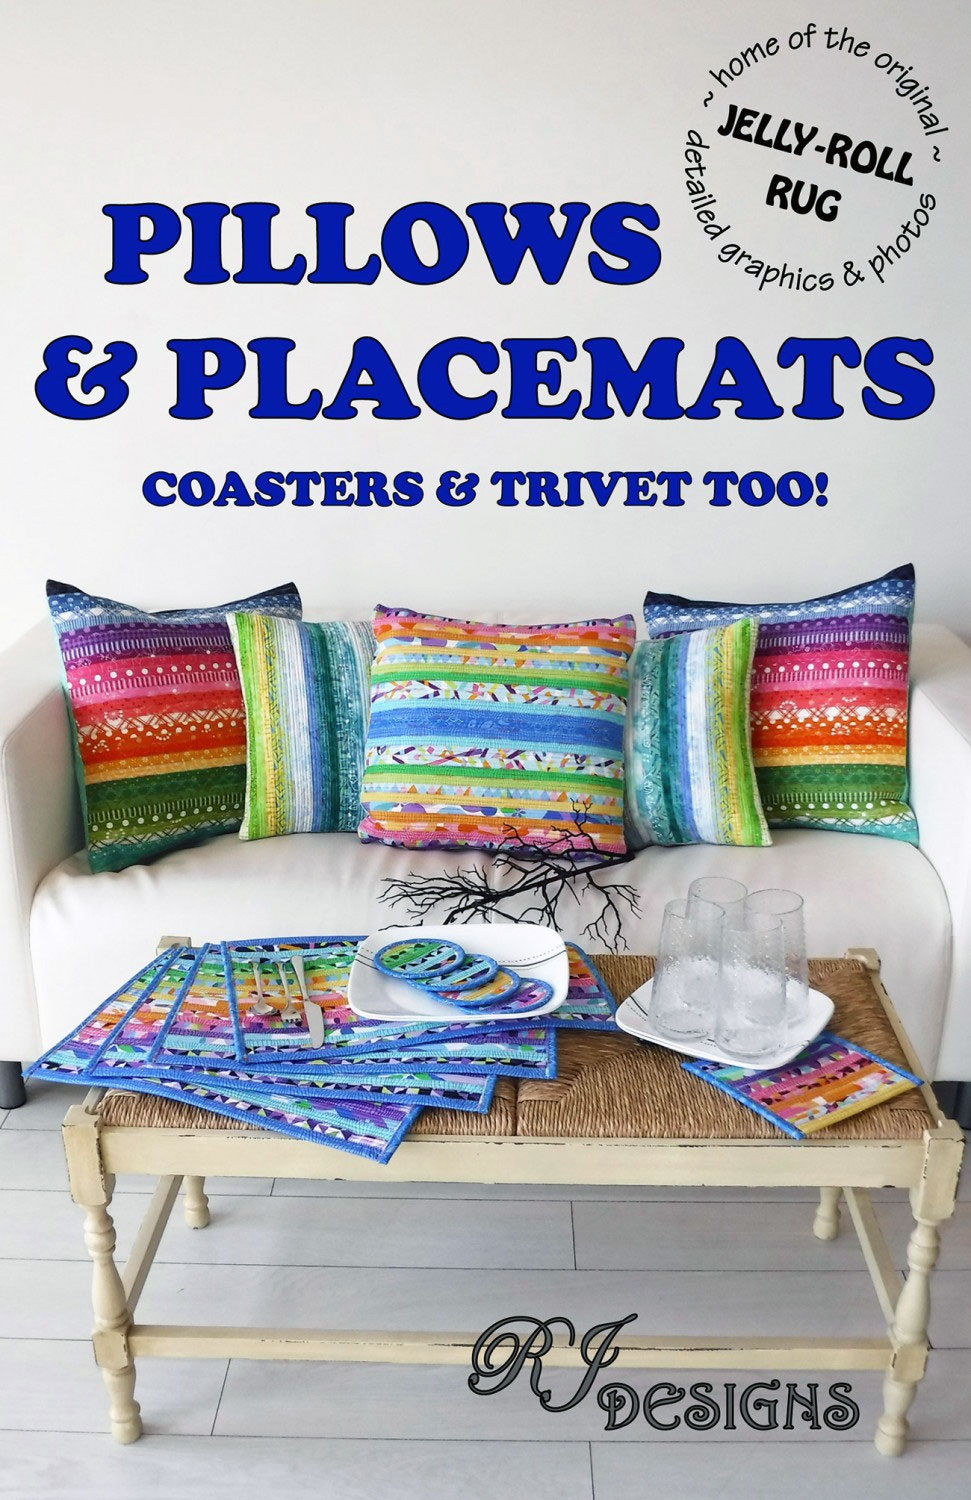 Pillows-and-Placemats-sewing-pattern-from-RJ-designs-front